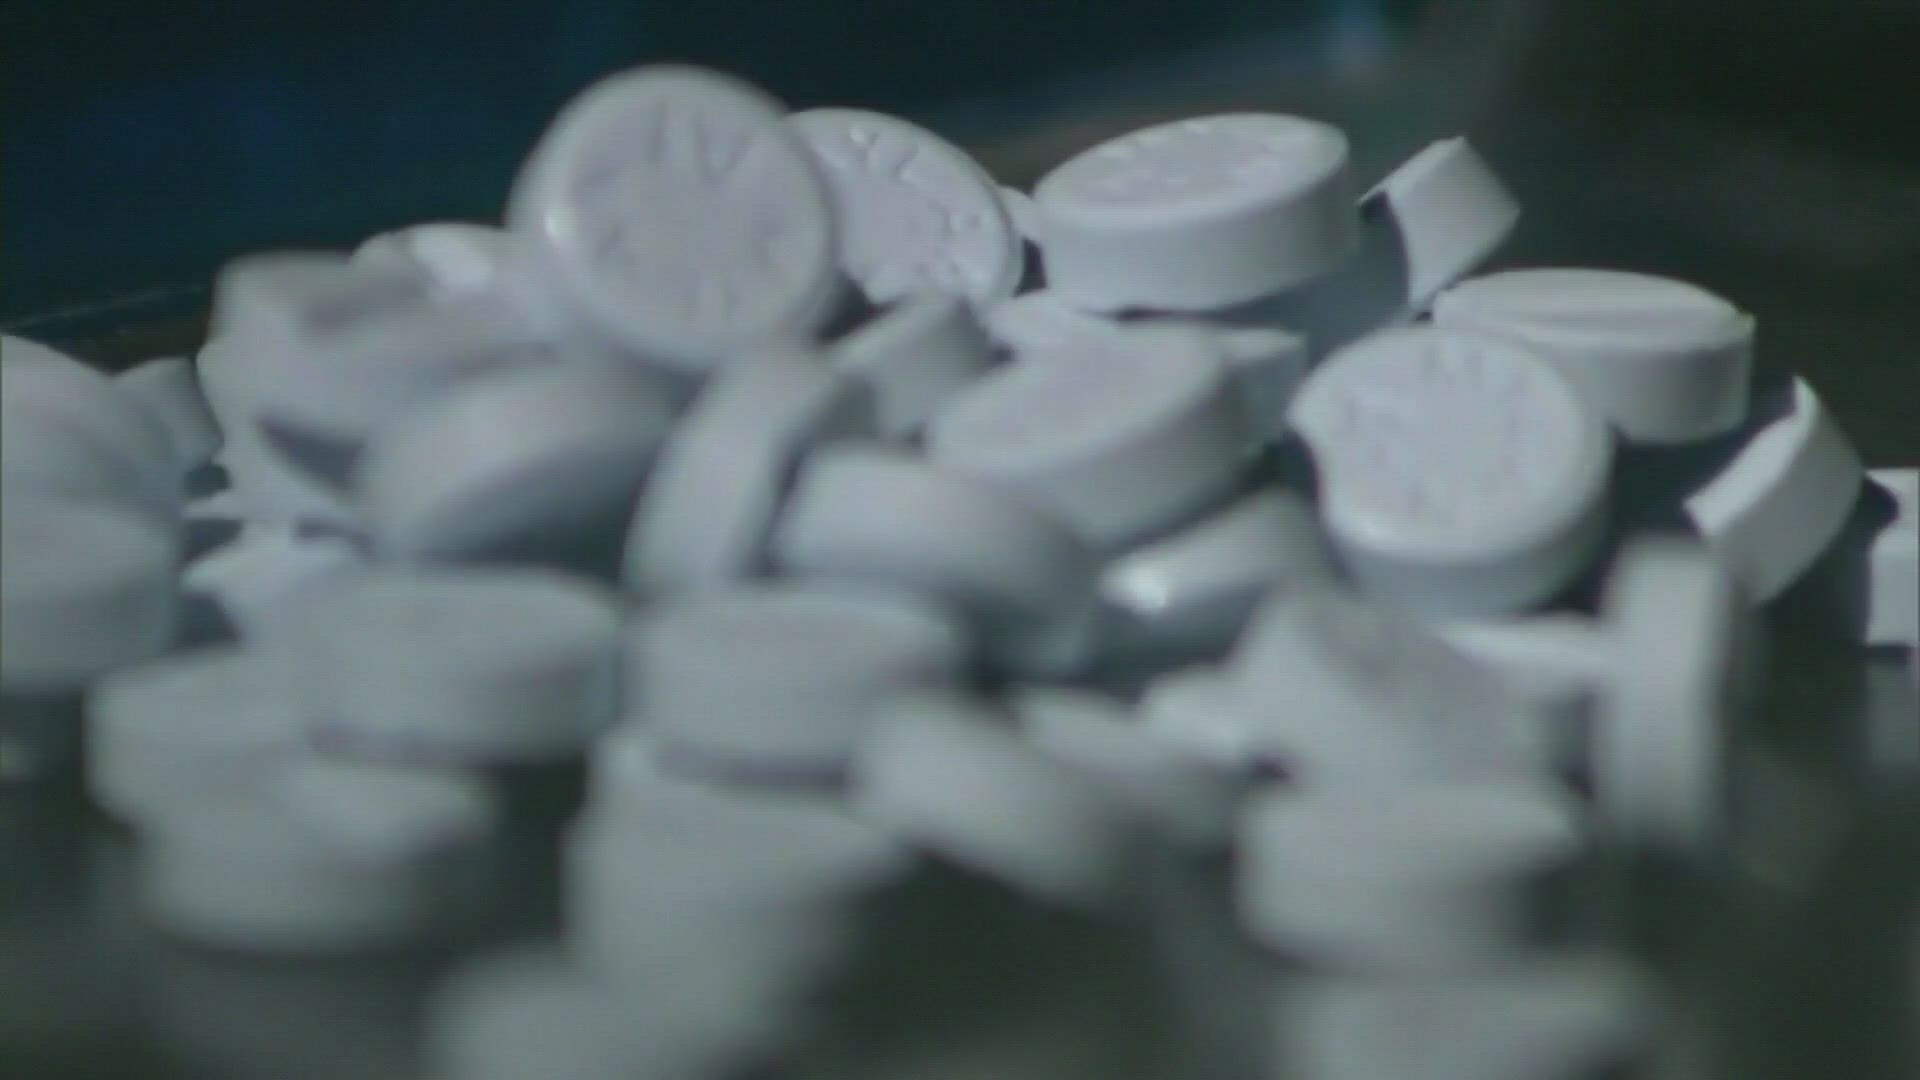 The drug, a powerful tranquilizer, is found laced on counterfeit opioid pills.